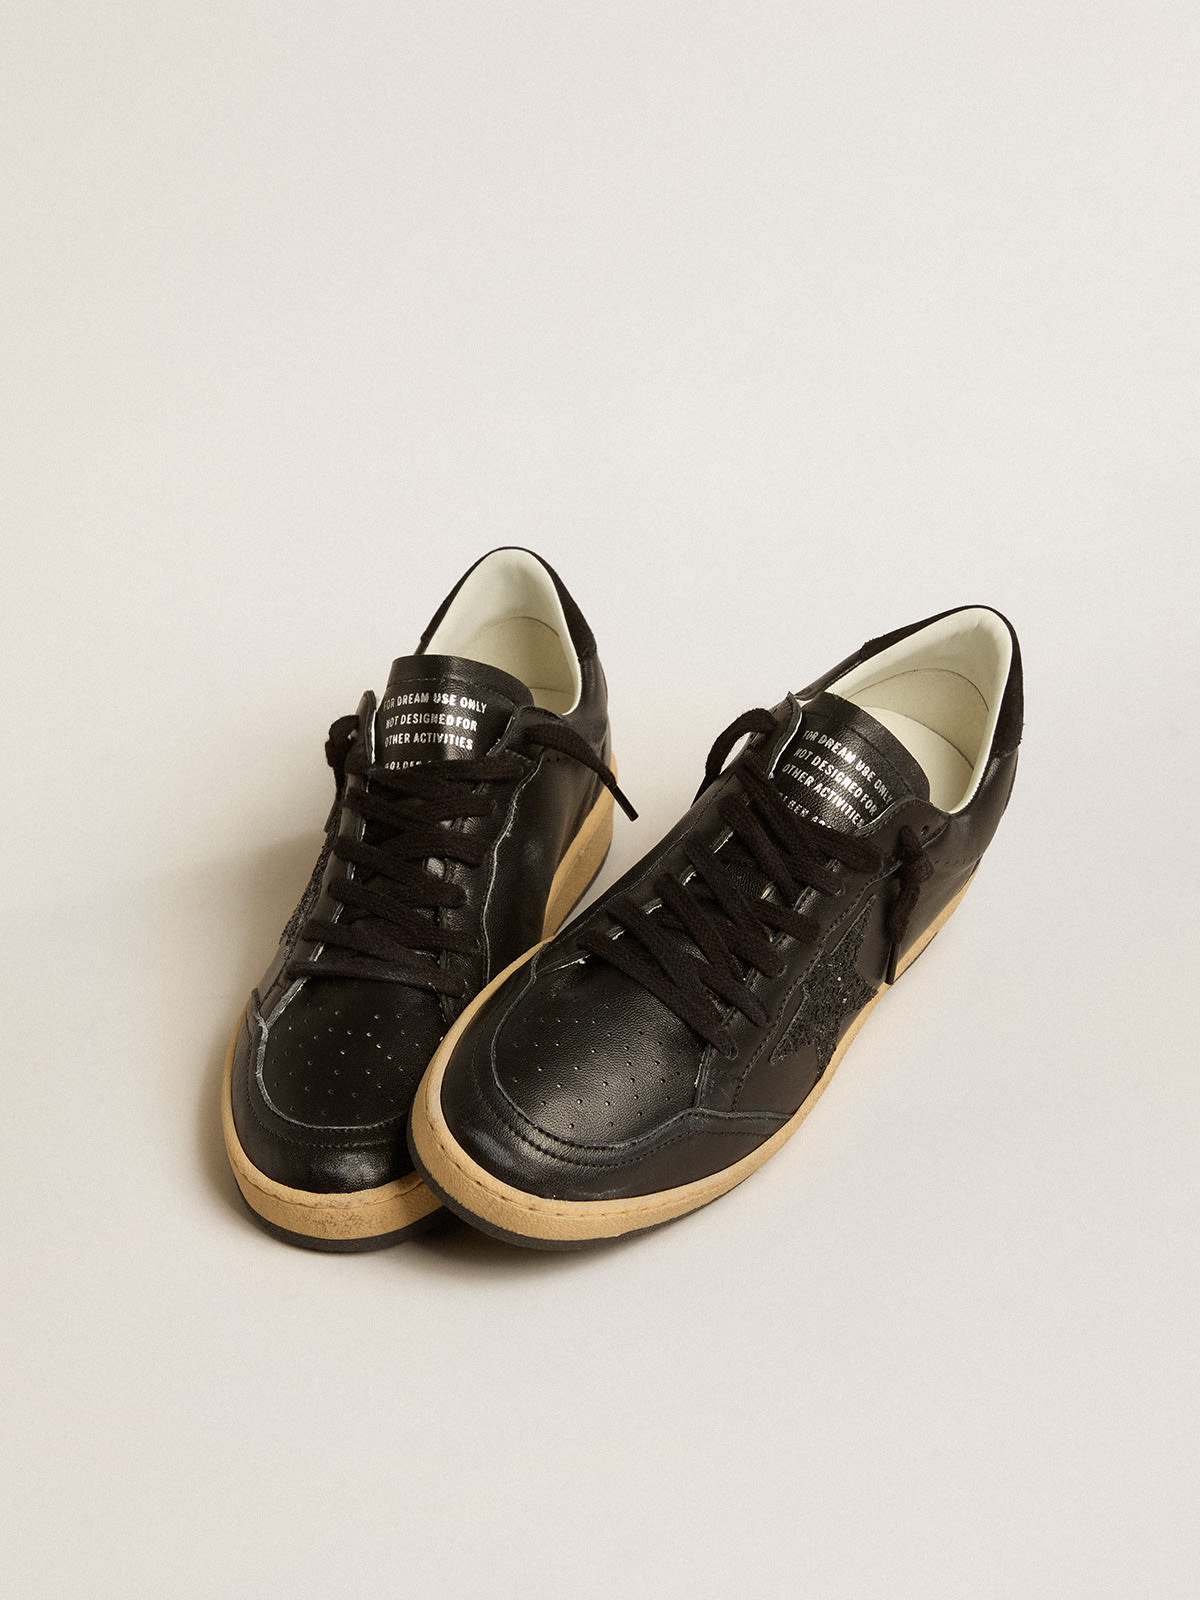 Golden Goose - Ball Star in black nappa leather with black glitter star and suede heel tab in 